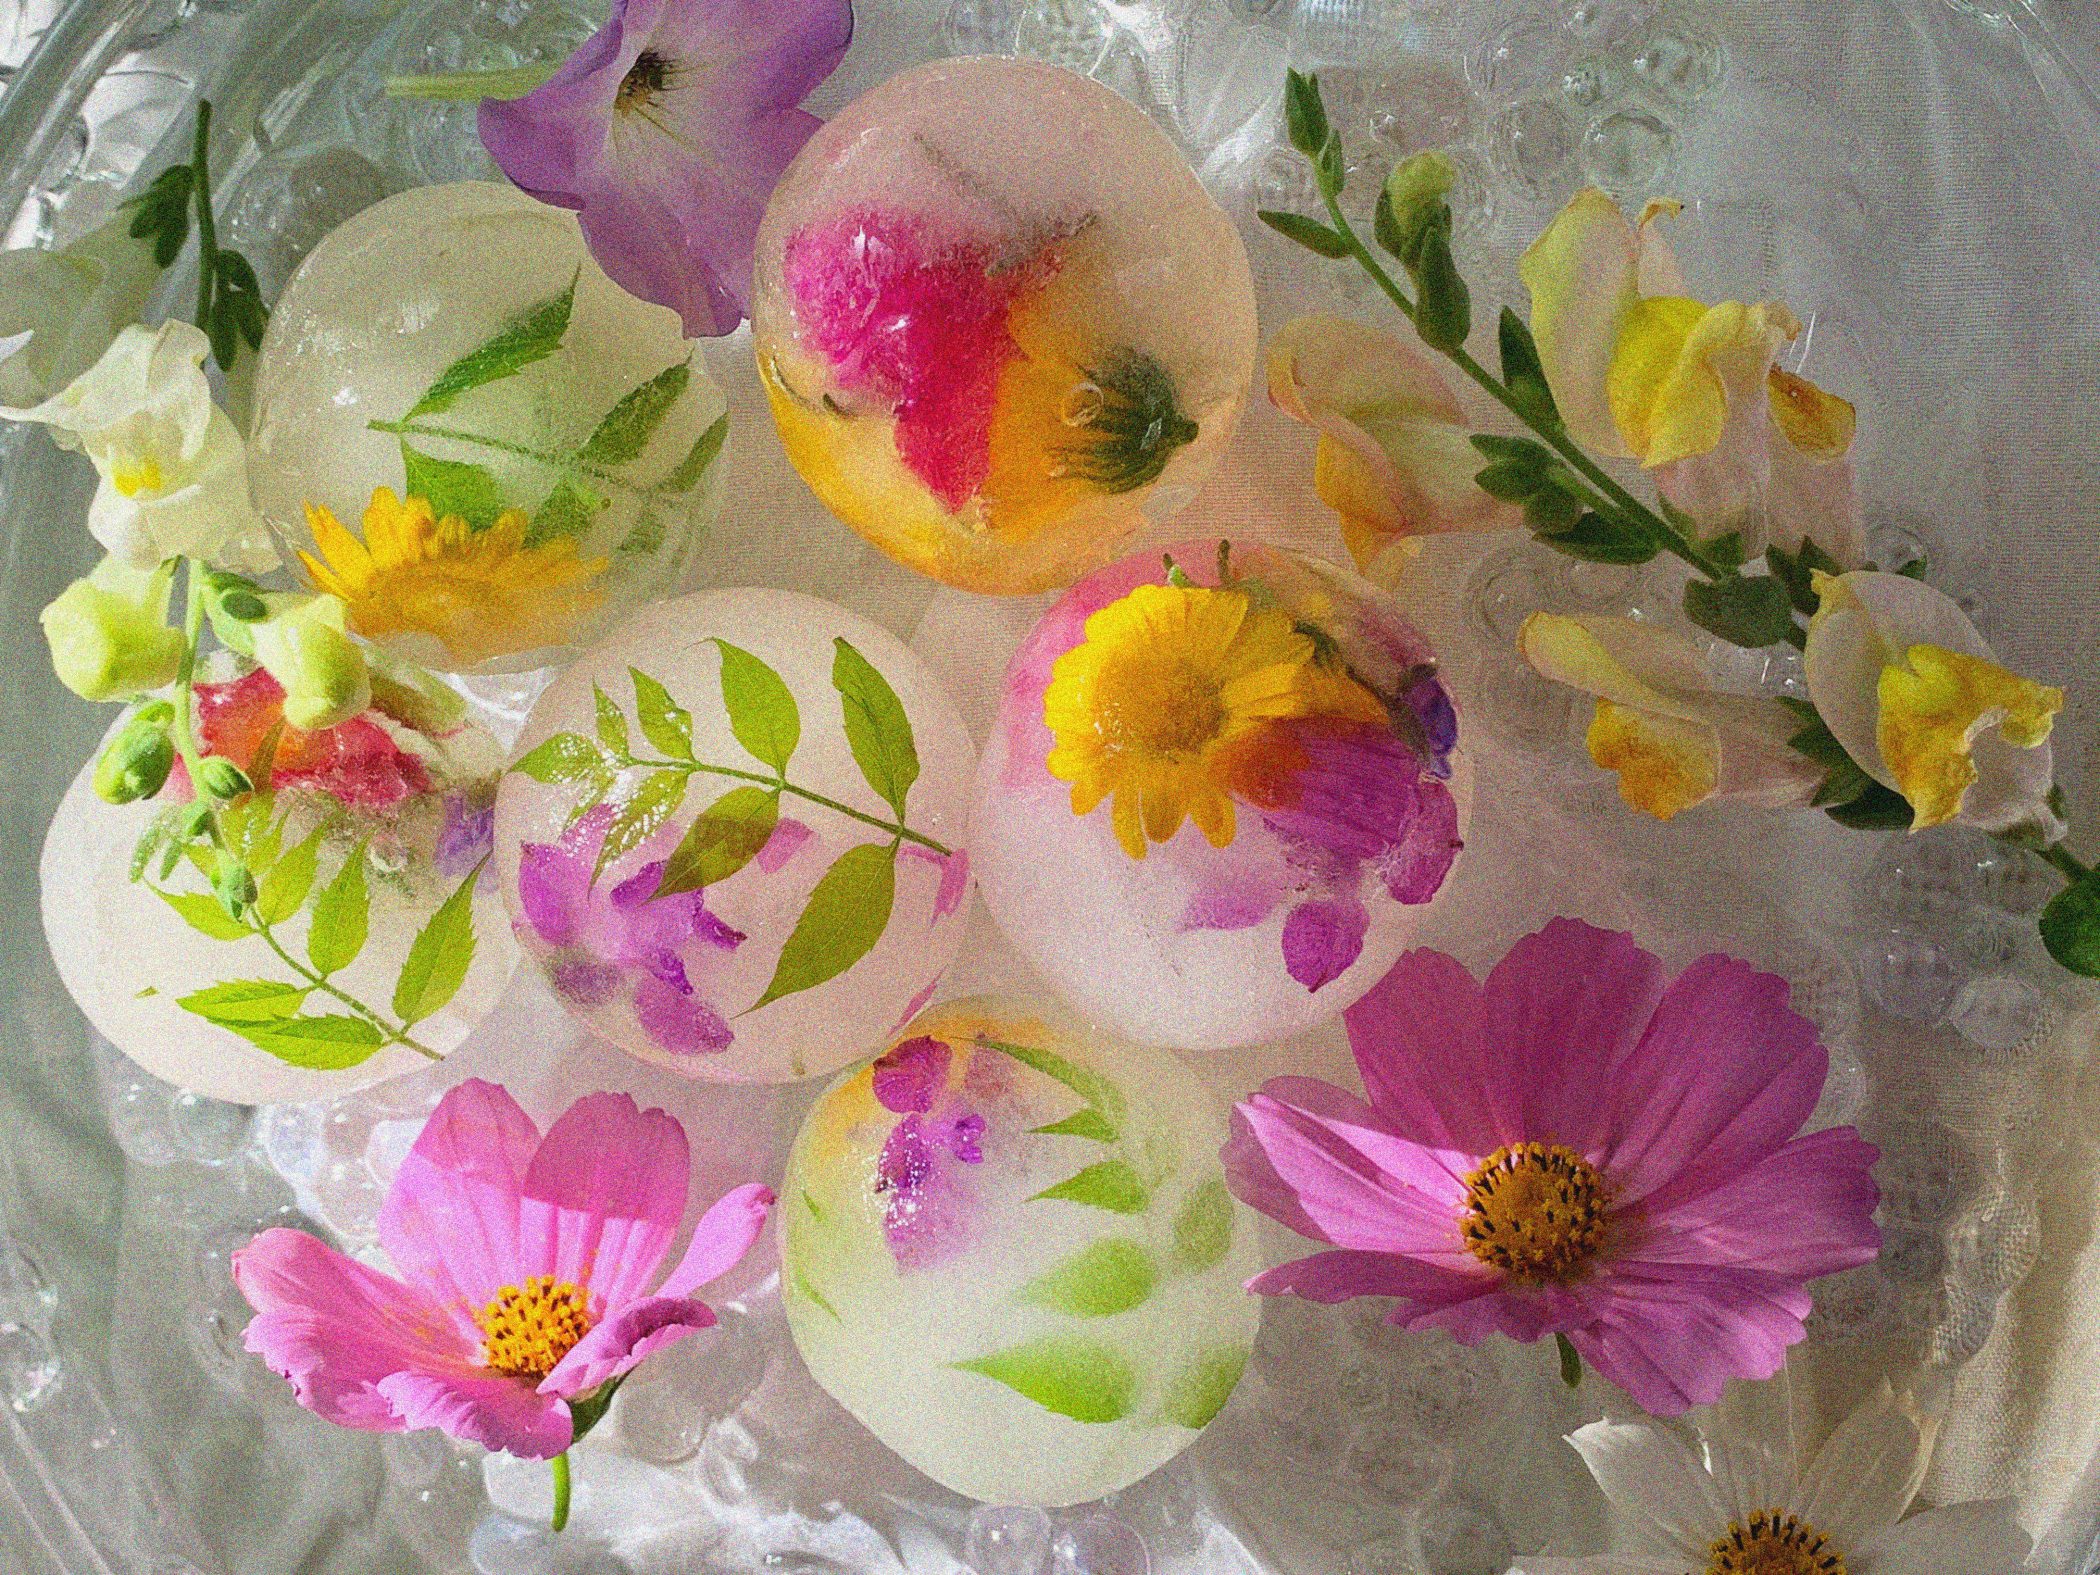 Sphere ice cubes with flowers infused in them